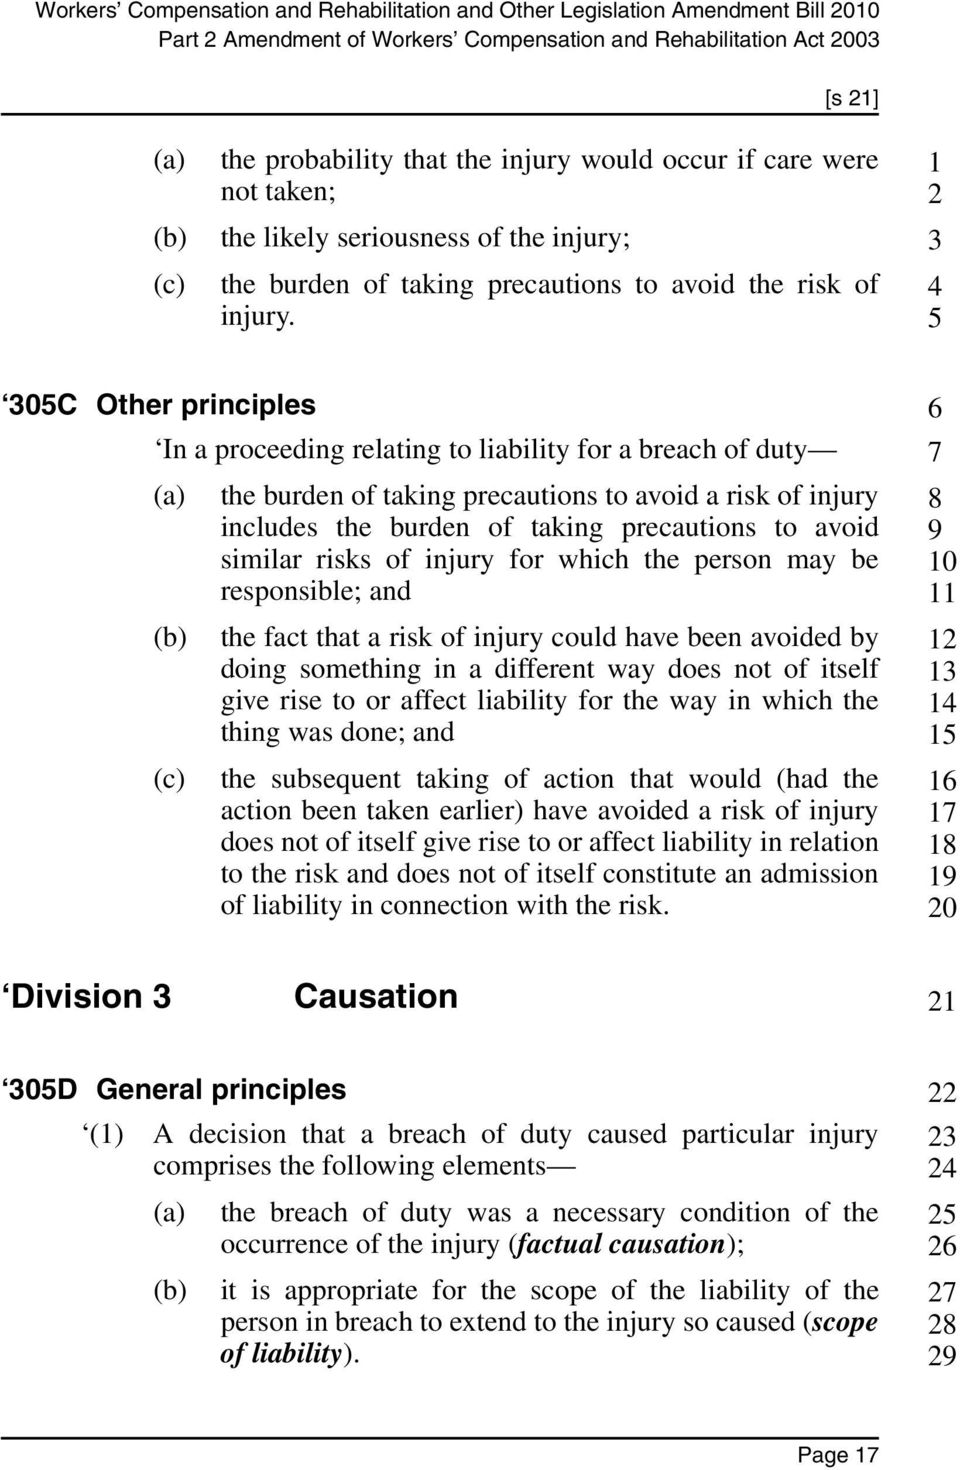 1 2 3 4 5 305C Other principles In a proceeding relating to liability for a breach of duty (a) the burden of taking precautions to avoid a risk of injury includes the burden of taking precautions to